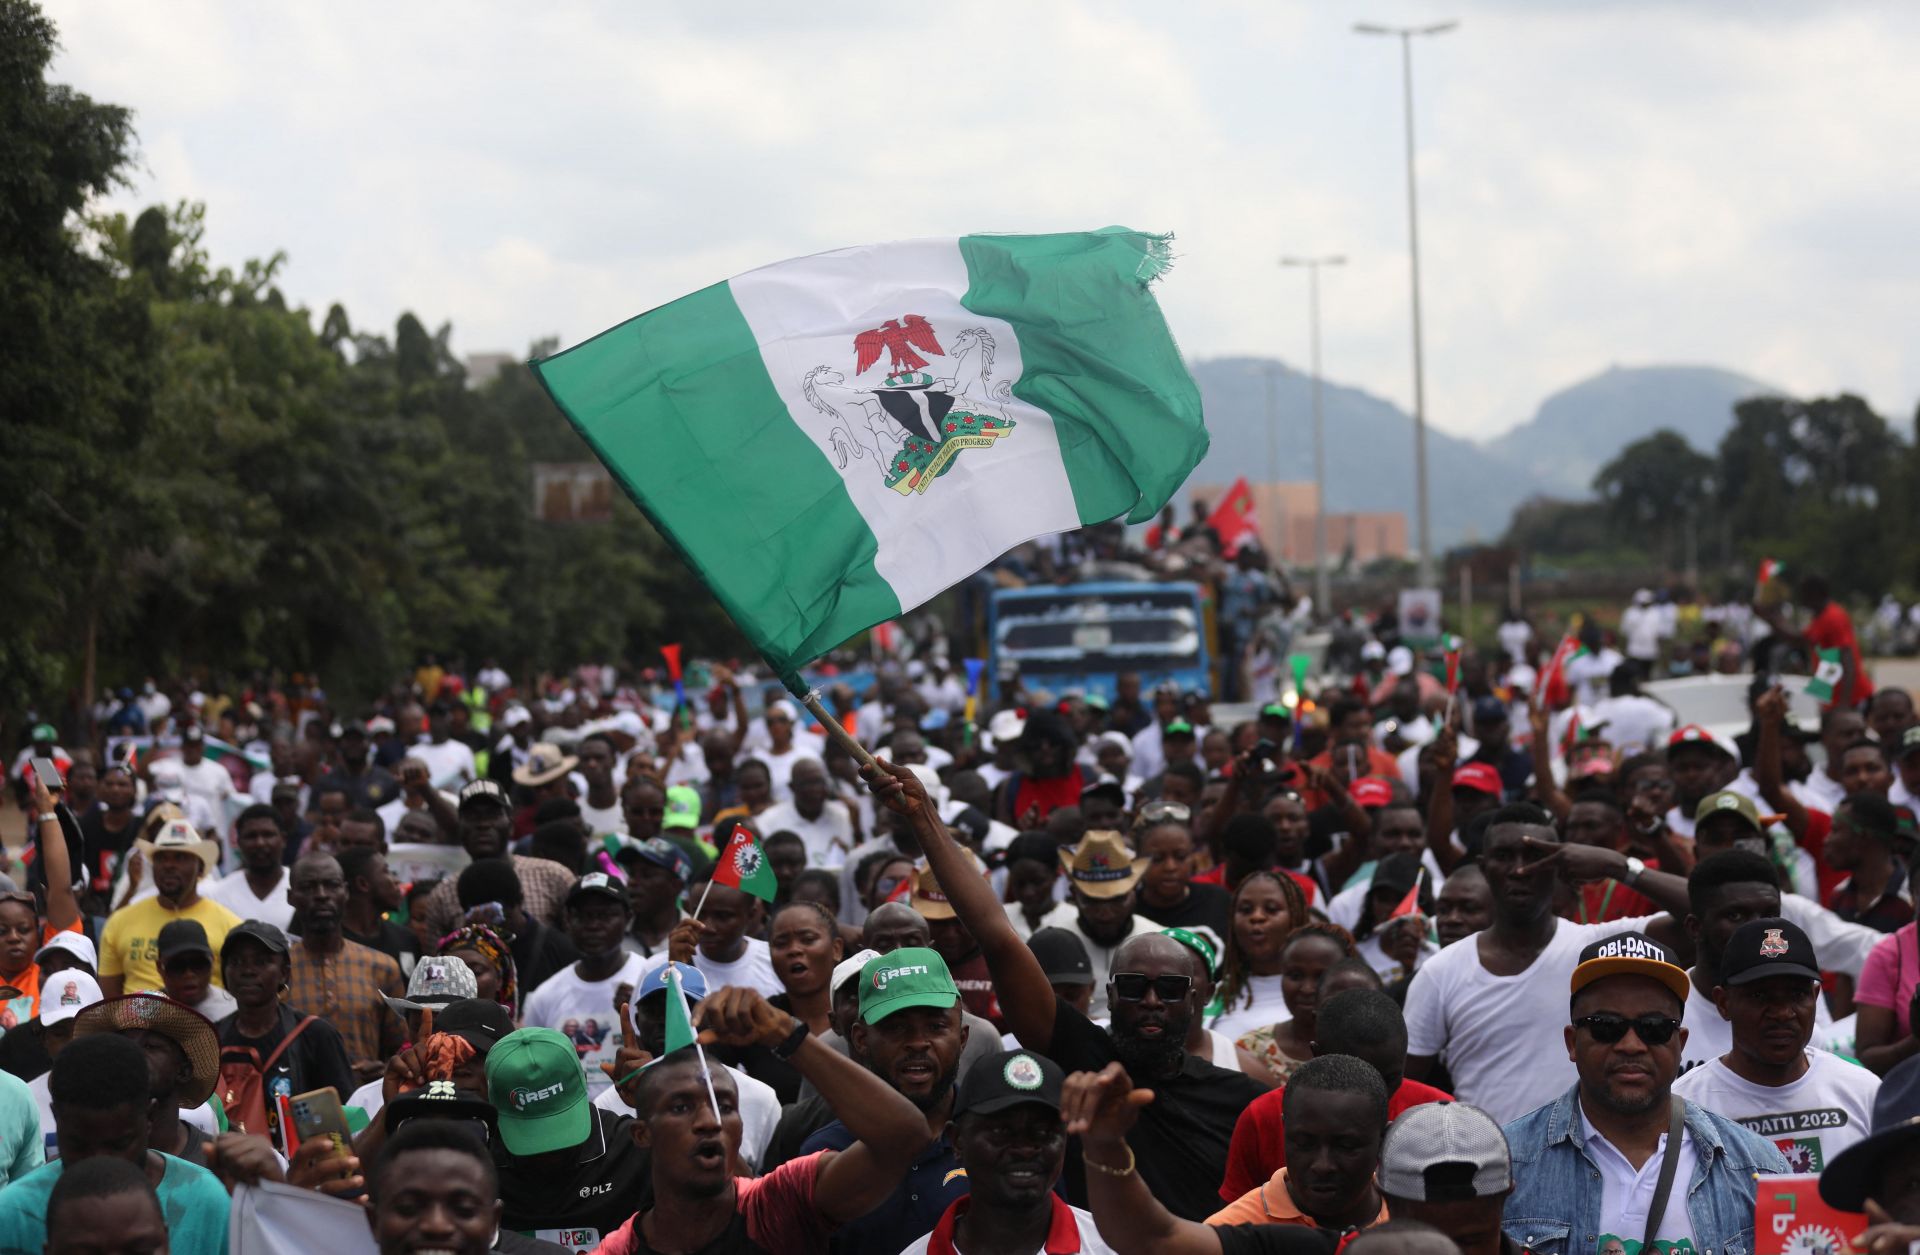 The Nigerian flag is waved above a crowd at a political rally for Labor Party candidate Peter Obi in Abuja, Nigeria, on Sept. 24, 2022. 